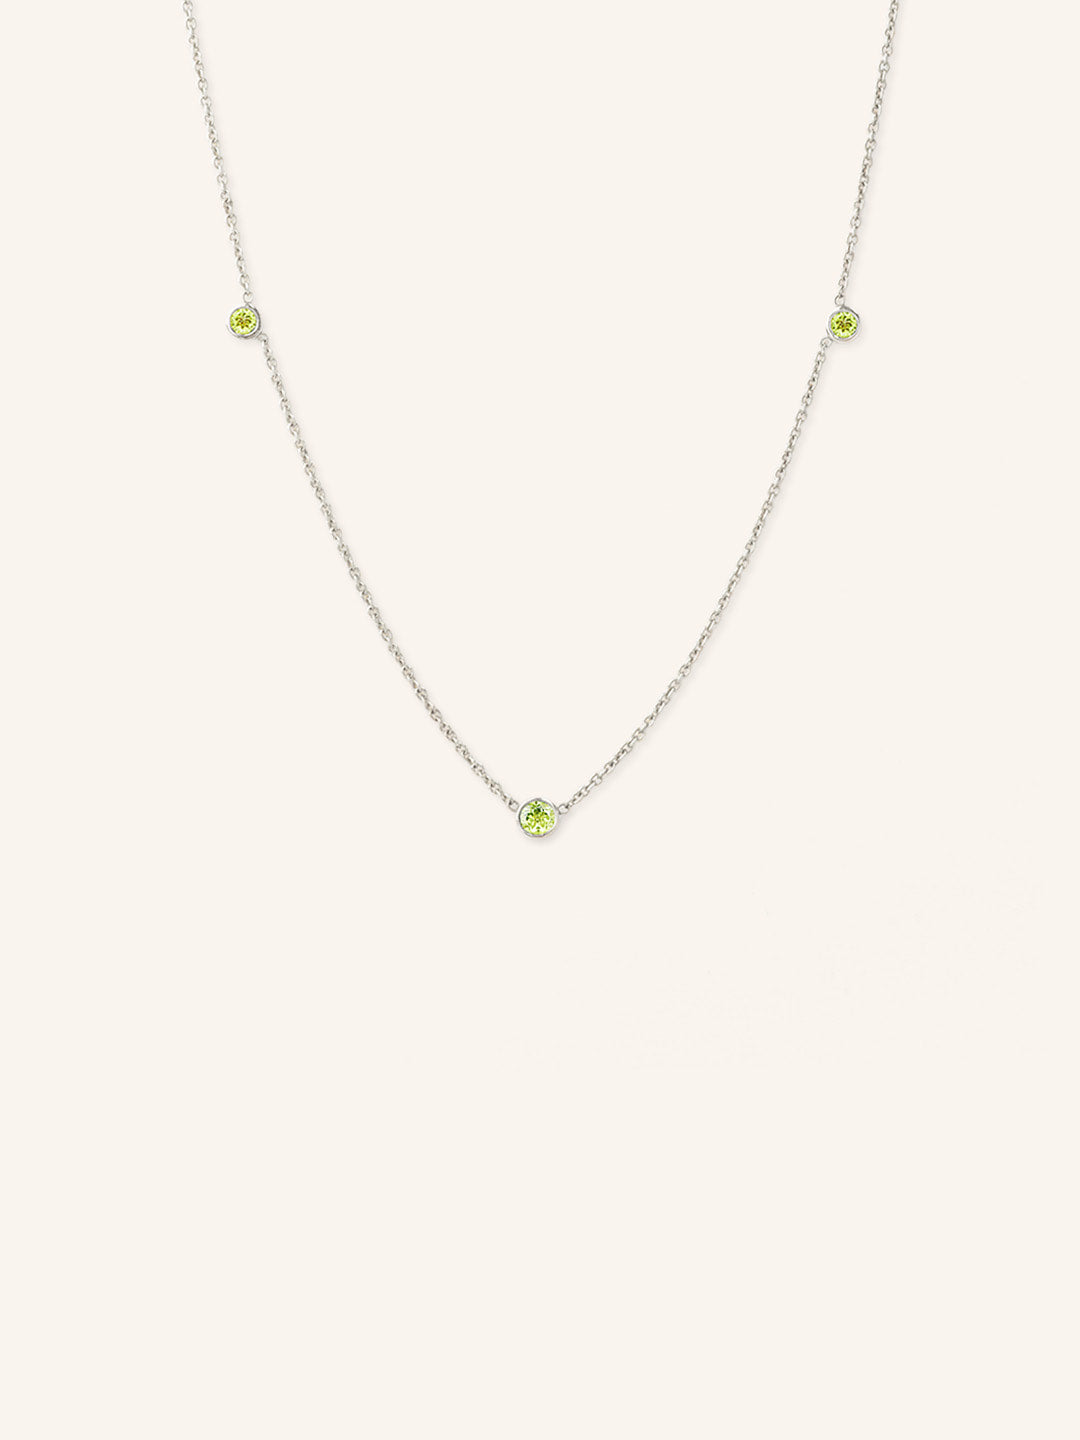 Orion's Peridot Necklace